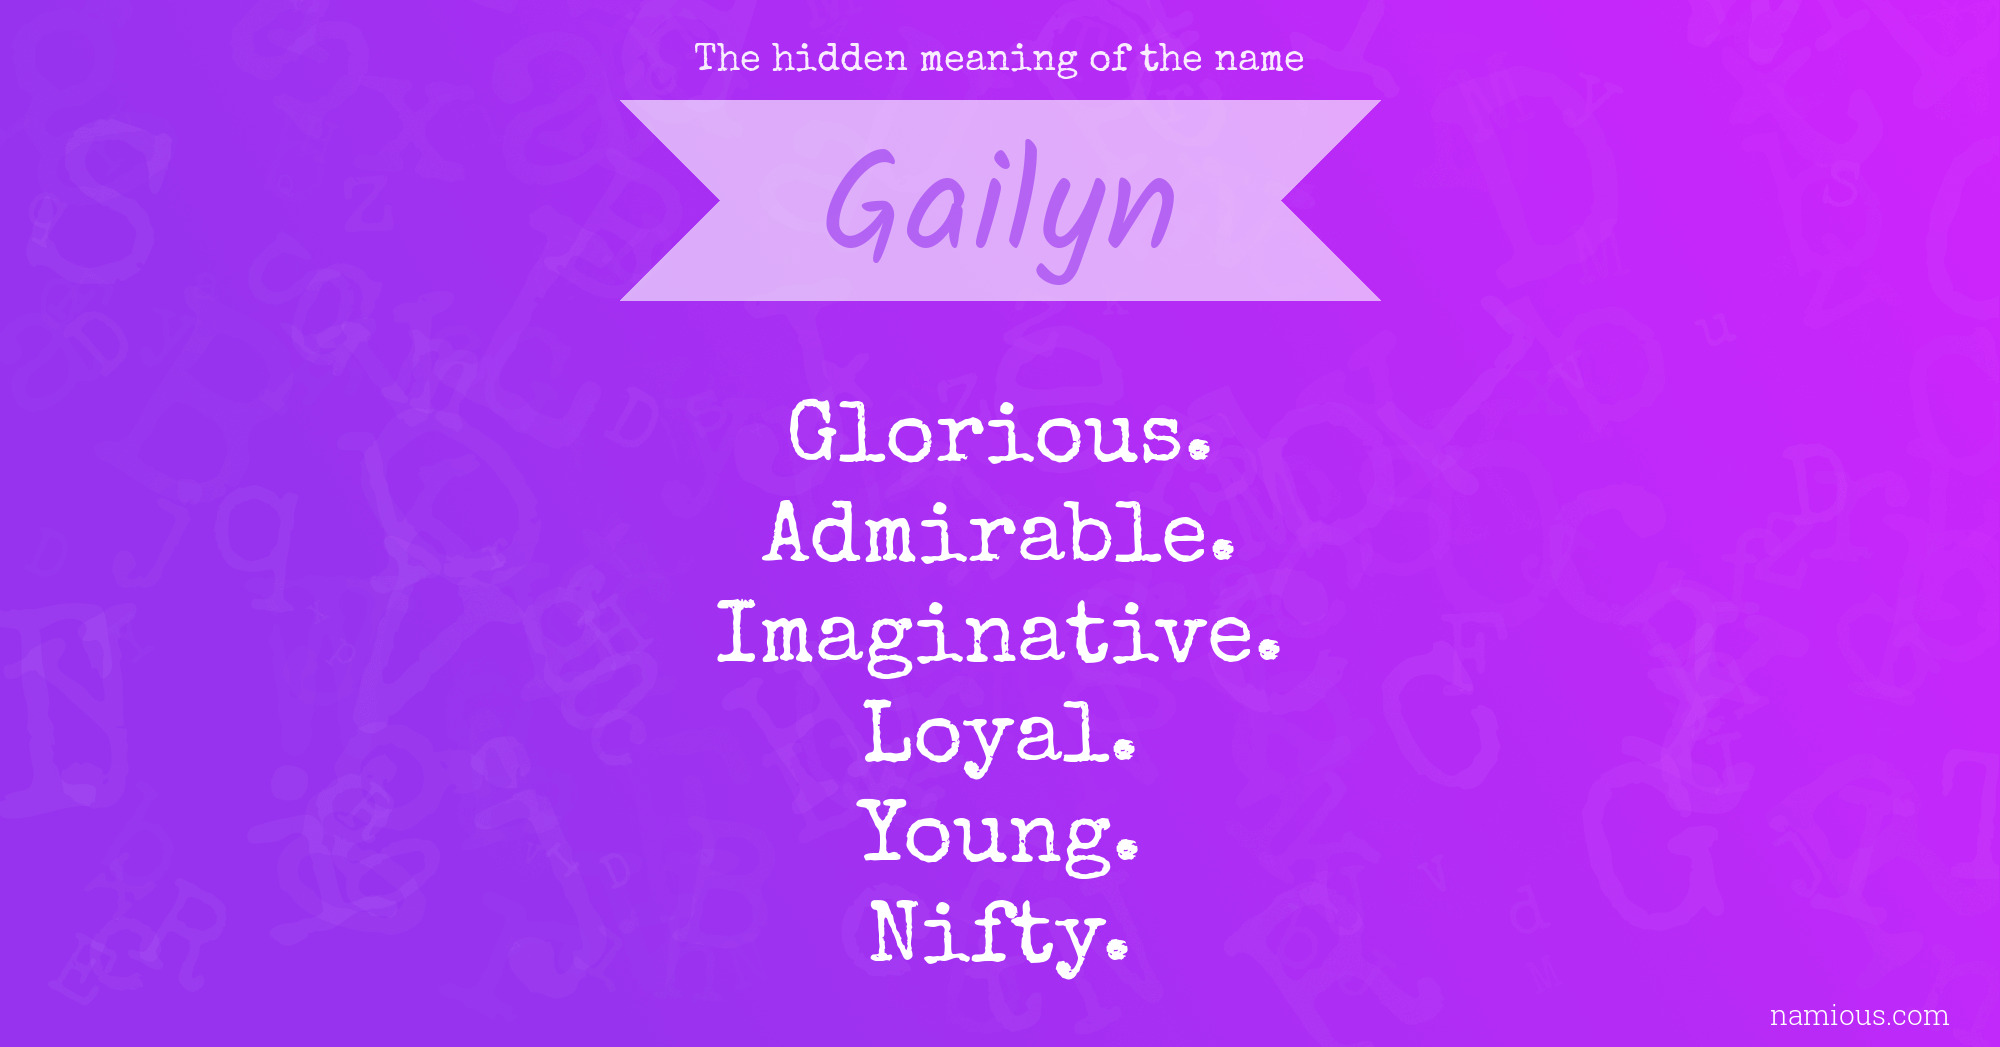 The hidden meaning of the name Gailyn